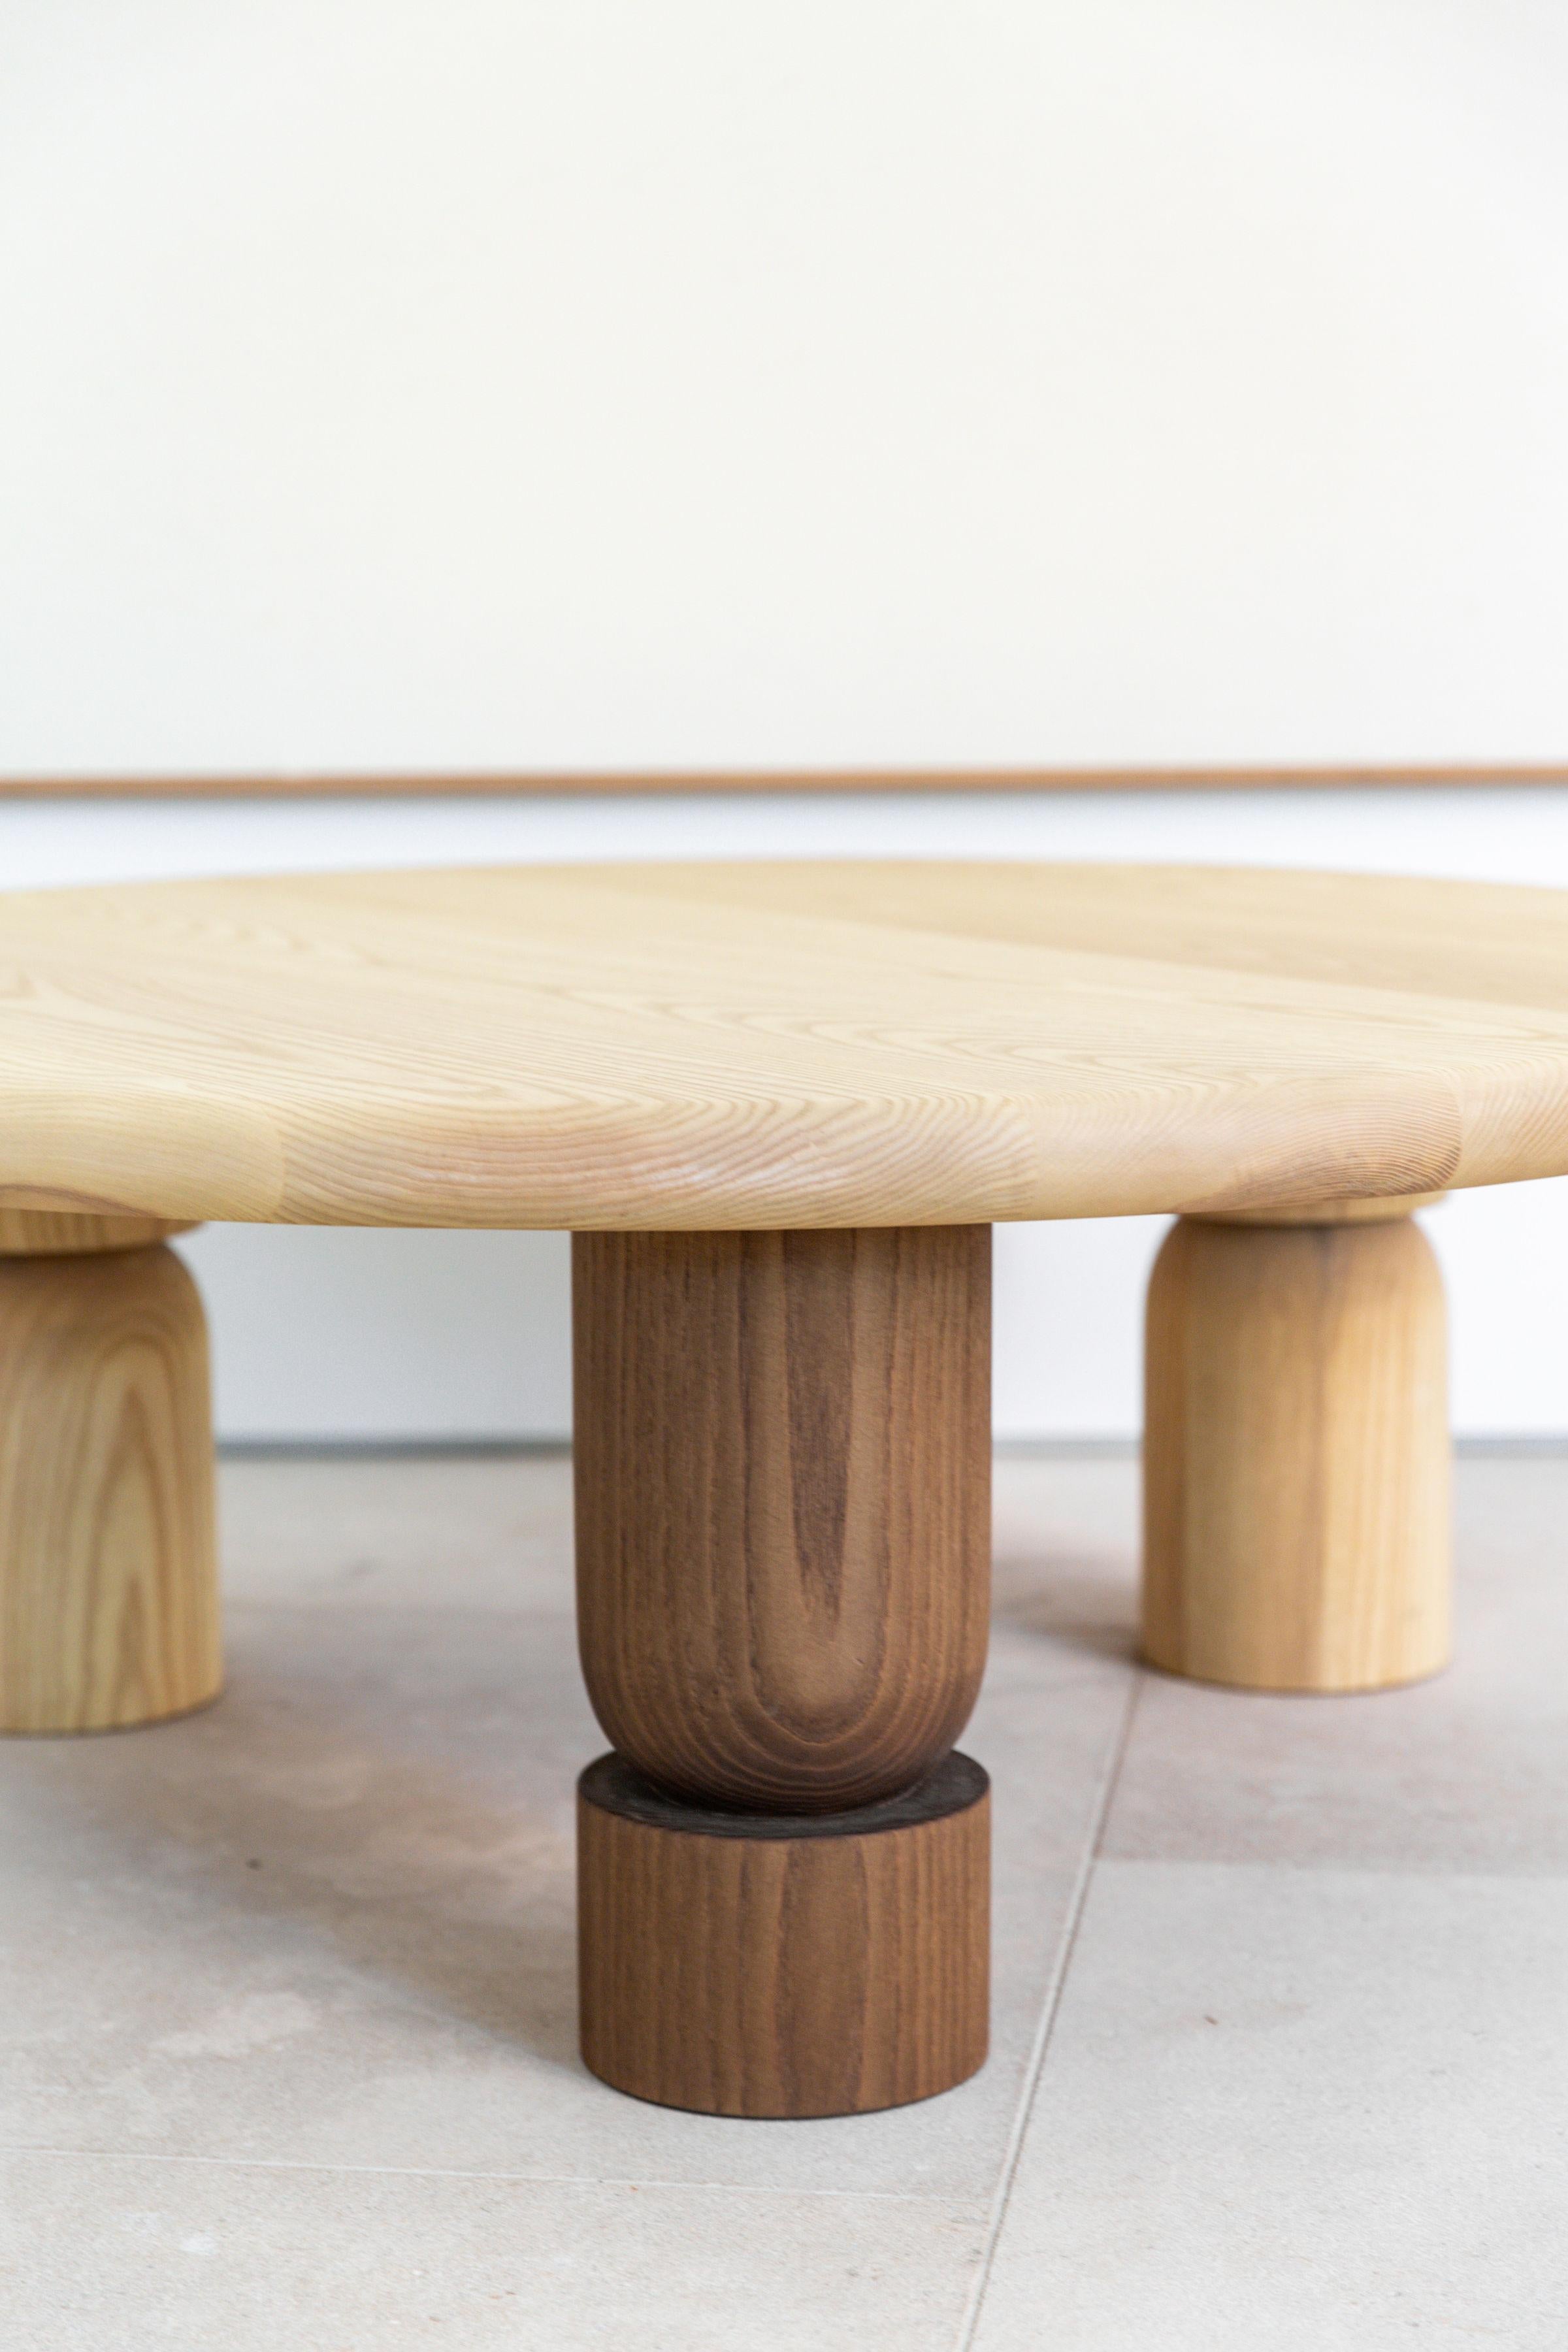 Part of the Michael Kussman/Natalie Myers collaboration Canyon Collection. Our capsule collection includes The Benmore table. A low coffee table with a fully rounded edge profile and three thick hand turned legs. One of the three legs is a wildcard.